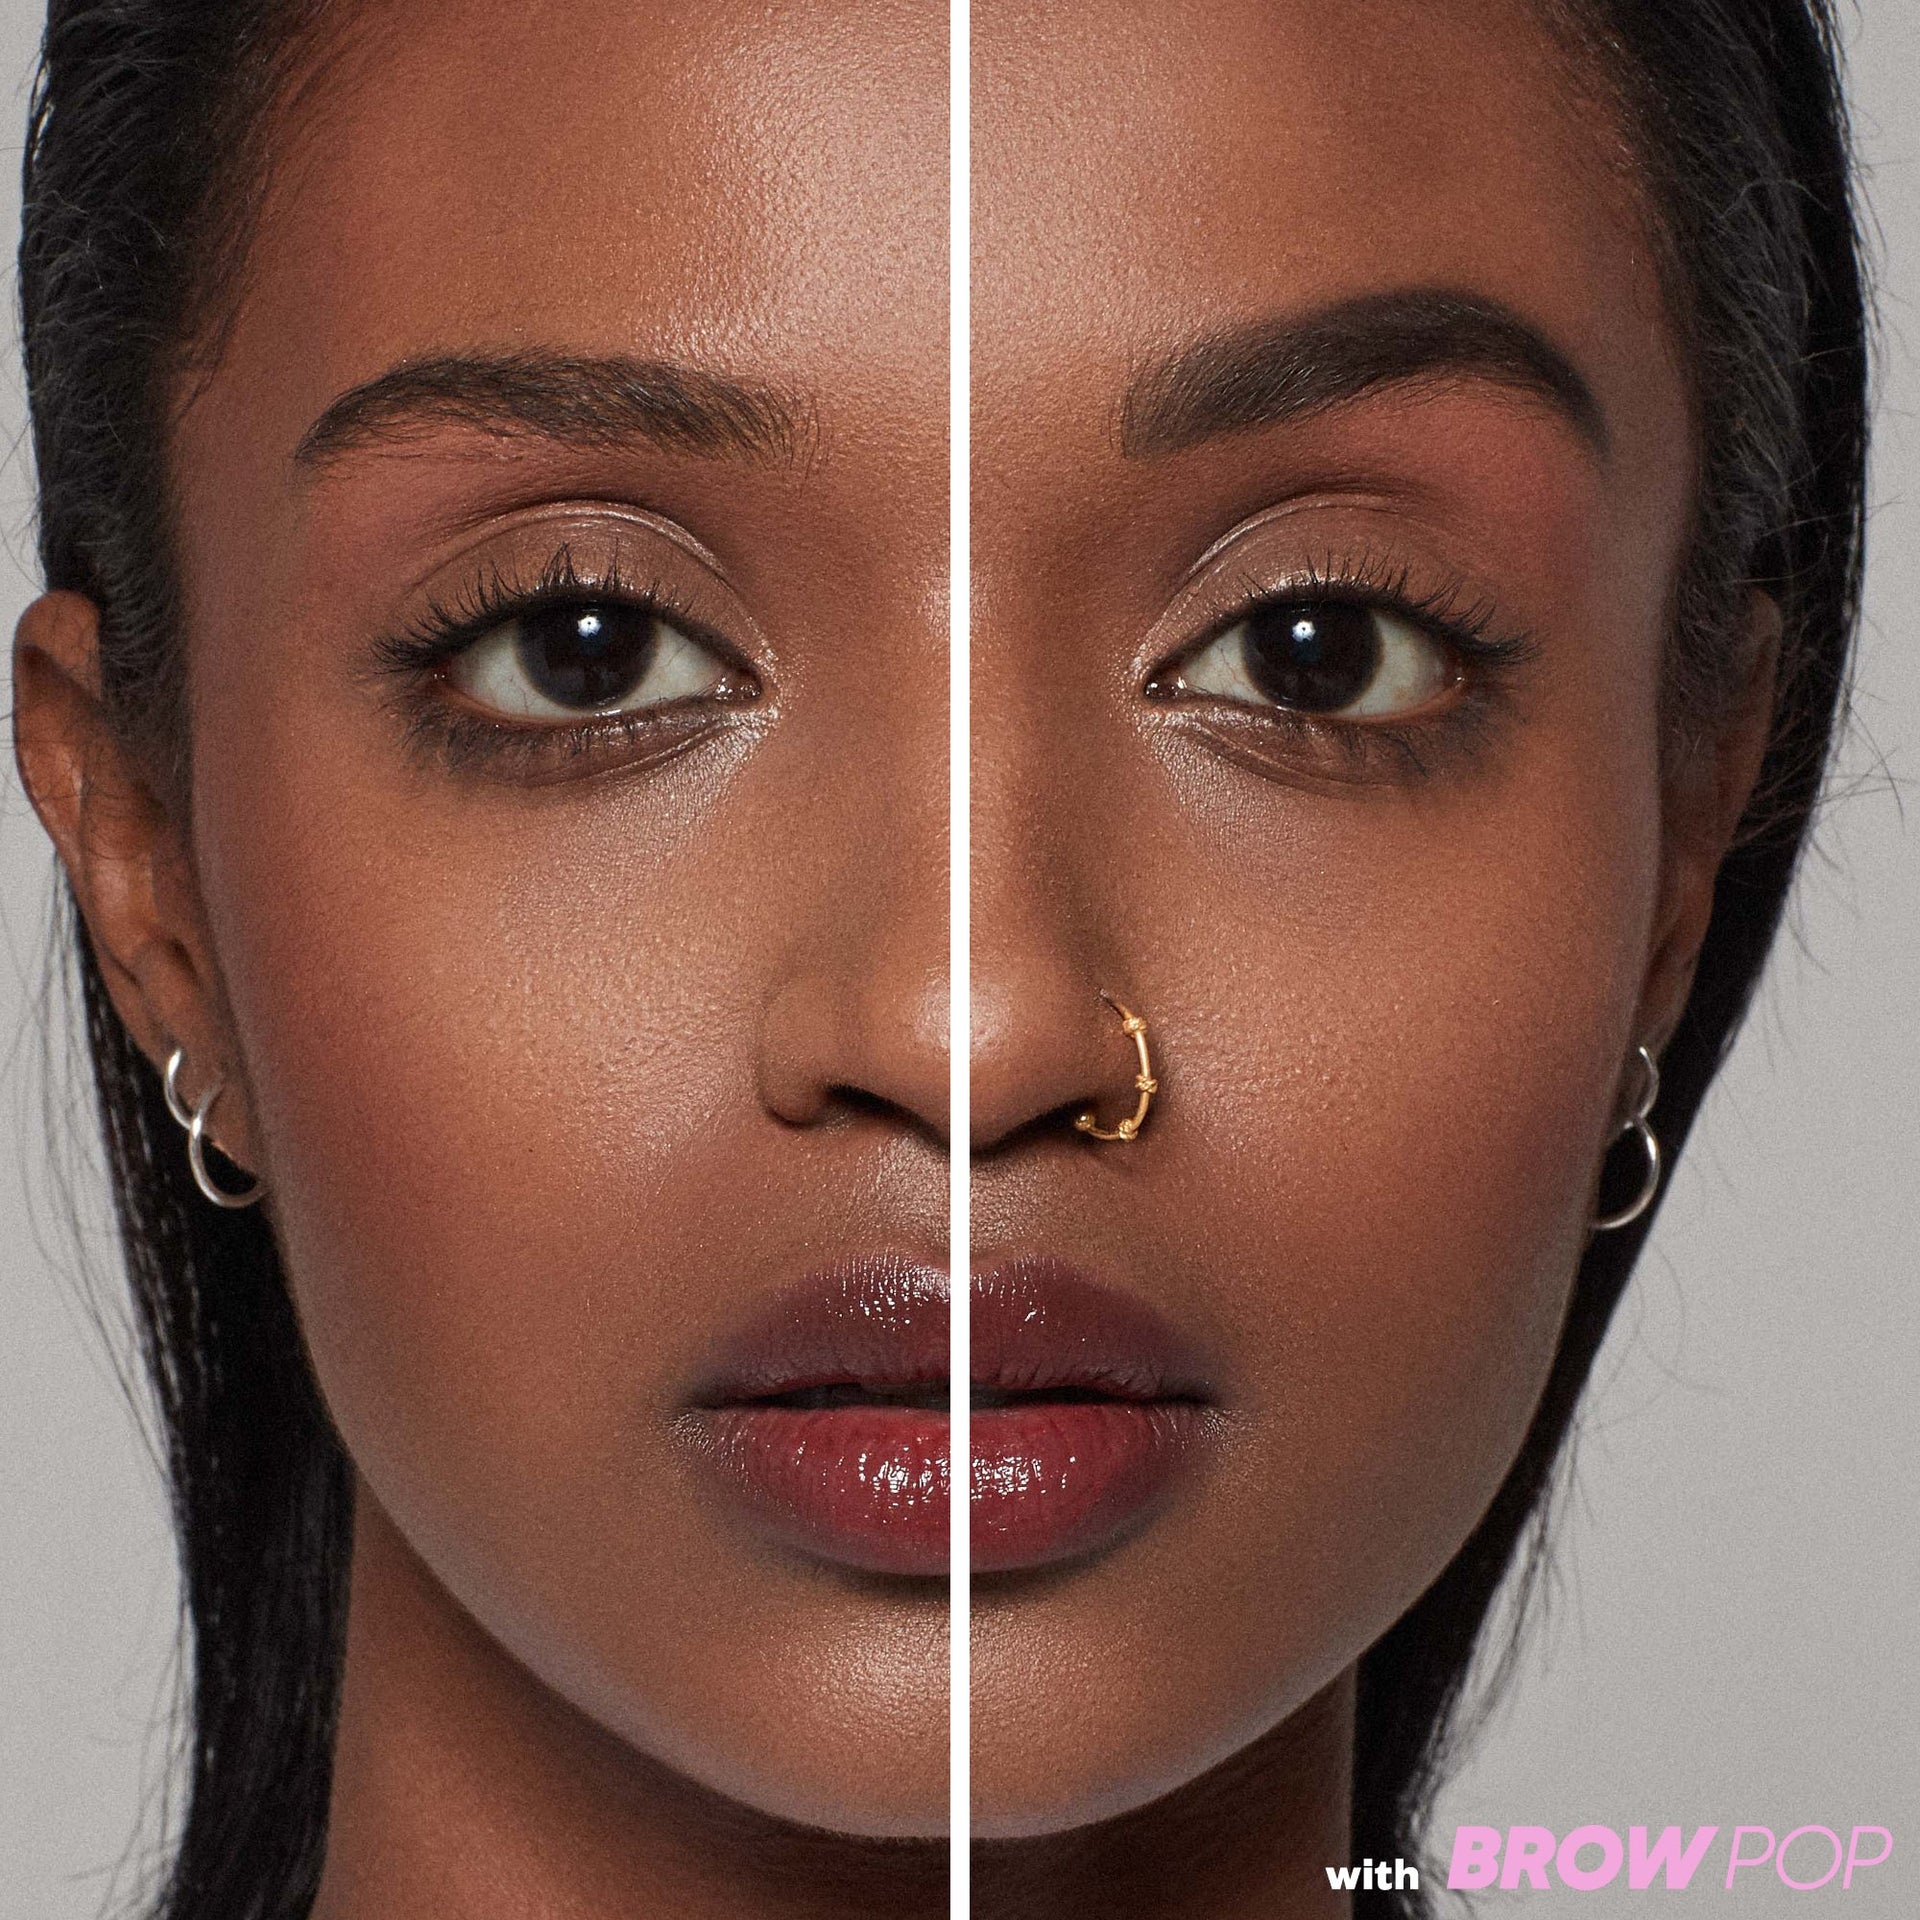 Before and after application of 'Brown Black' Brow Pop shade.